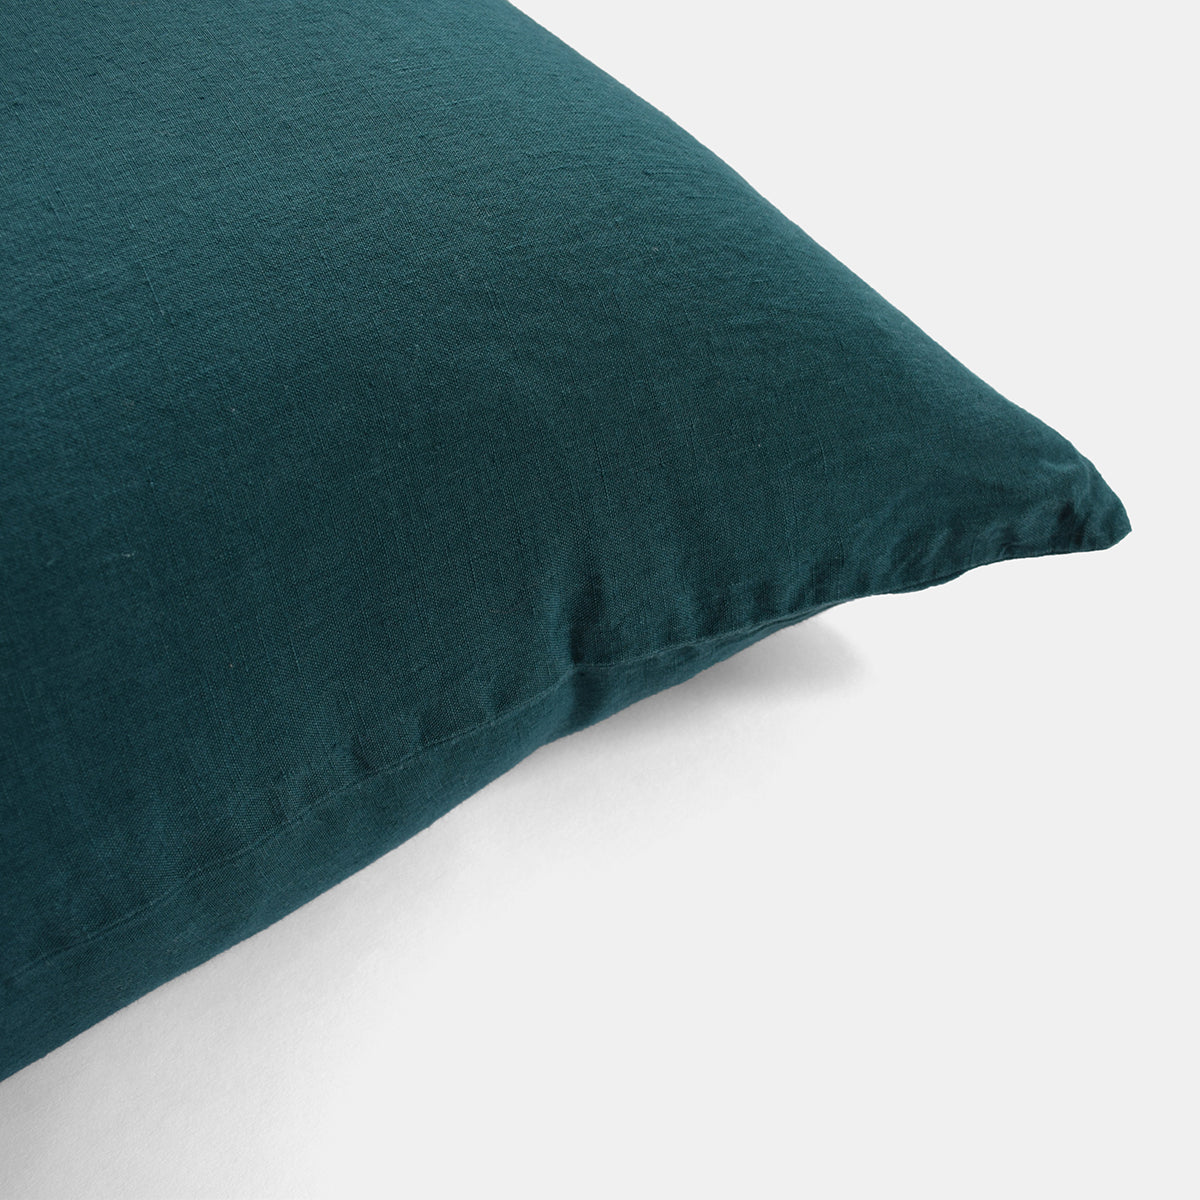 Linge Particulier Vintage Green Standard Linen Pillowcase Sham for a colorful linen bedding look in deep teal green - Collyer&#39;s Mansion